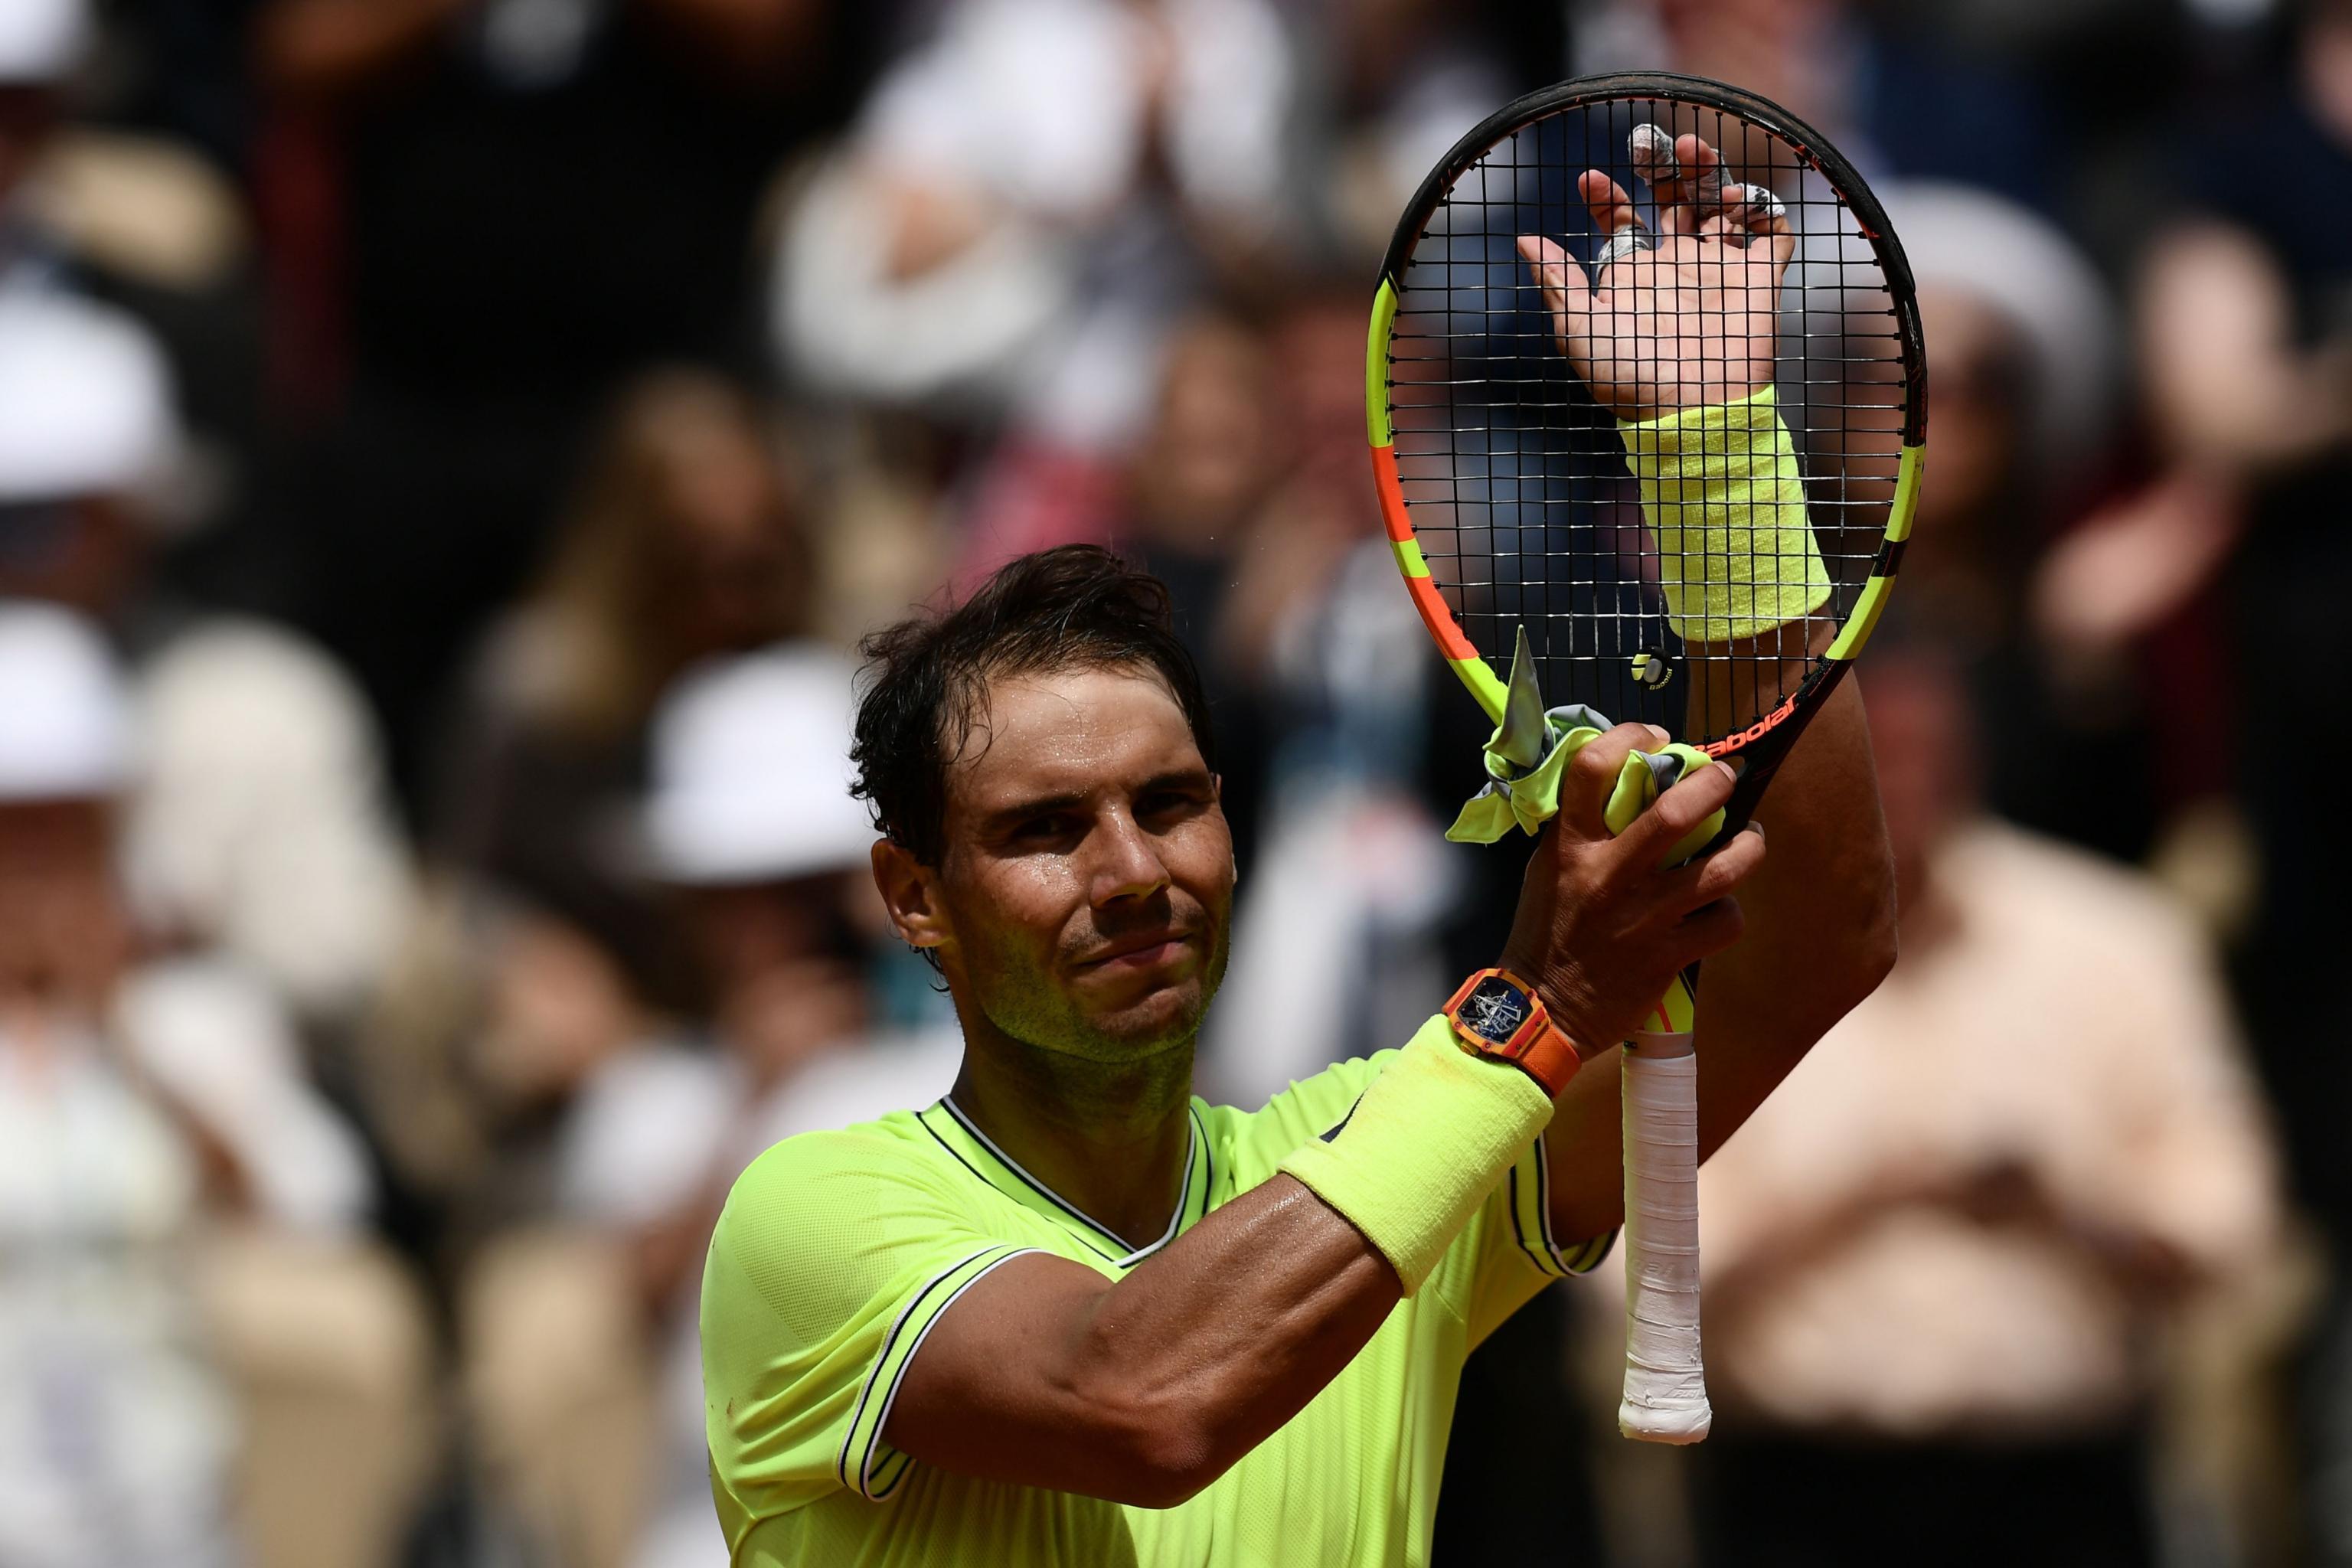 French Open 2019: Rafael Nadal's Win Highlights Wednesday's Early Results Open 2019: Rafael Nadal's Win Highlights Wednesday's Early. Nadal Roland Garros 2019 Wallpaper